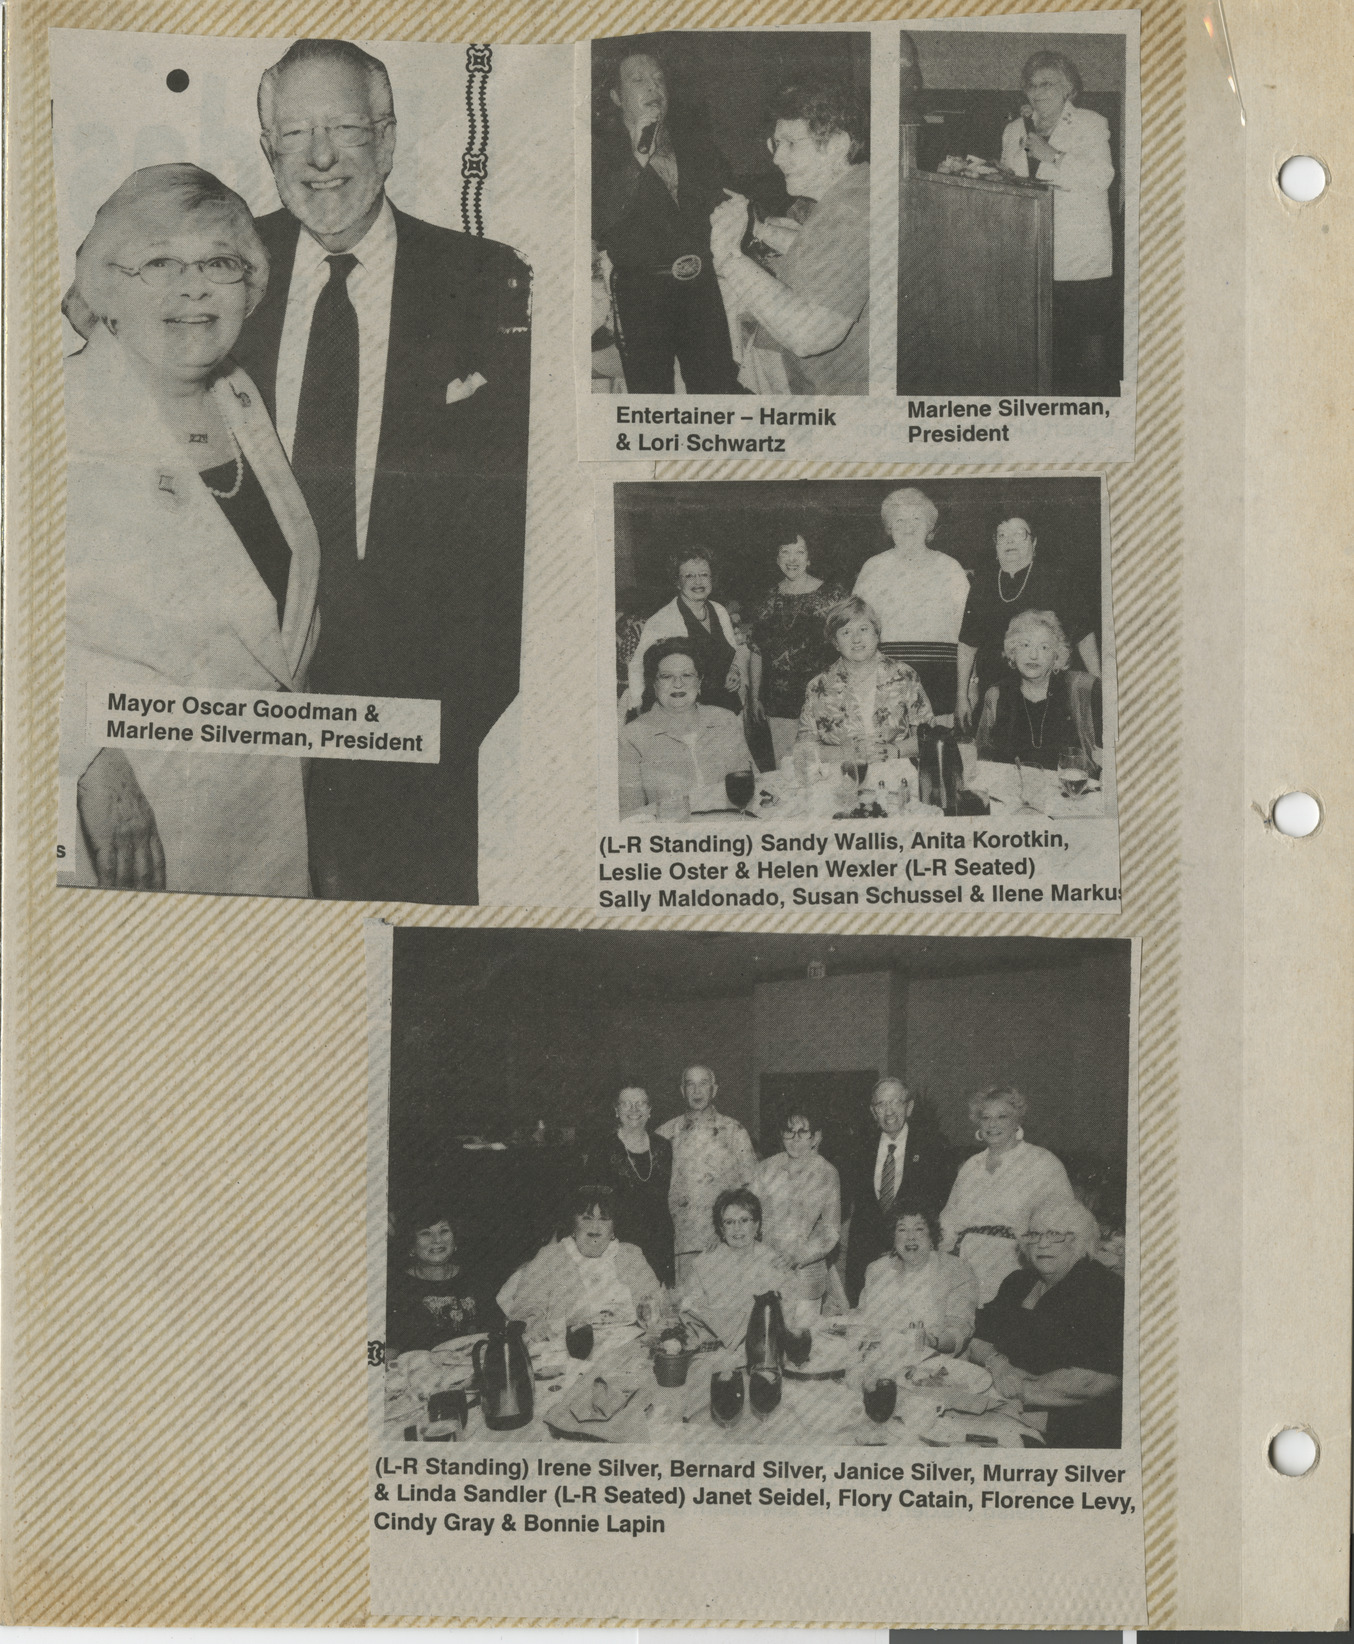 Newspaper clippings for Hadassah event, publication and date unknown